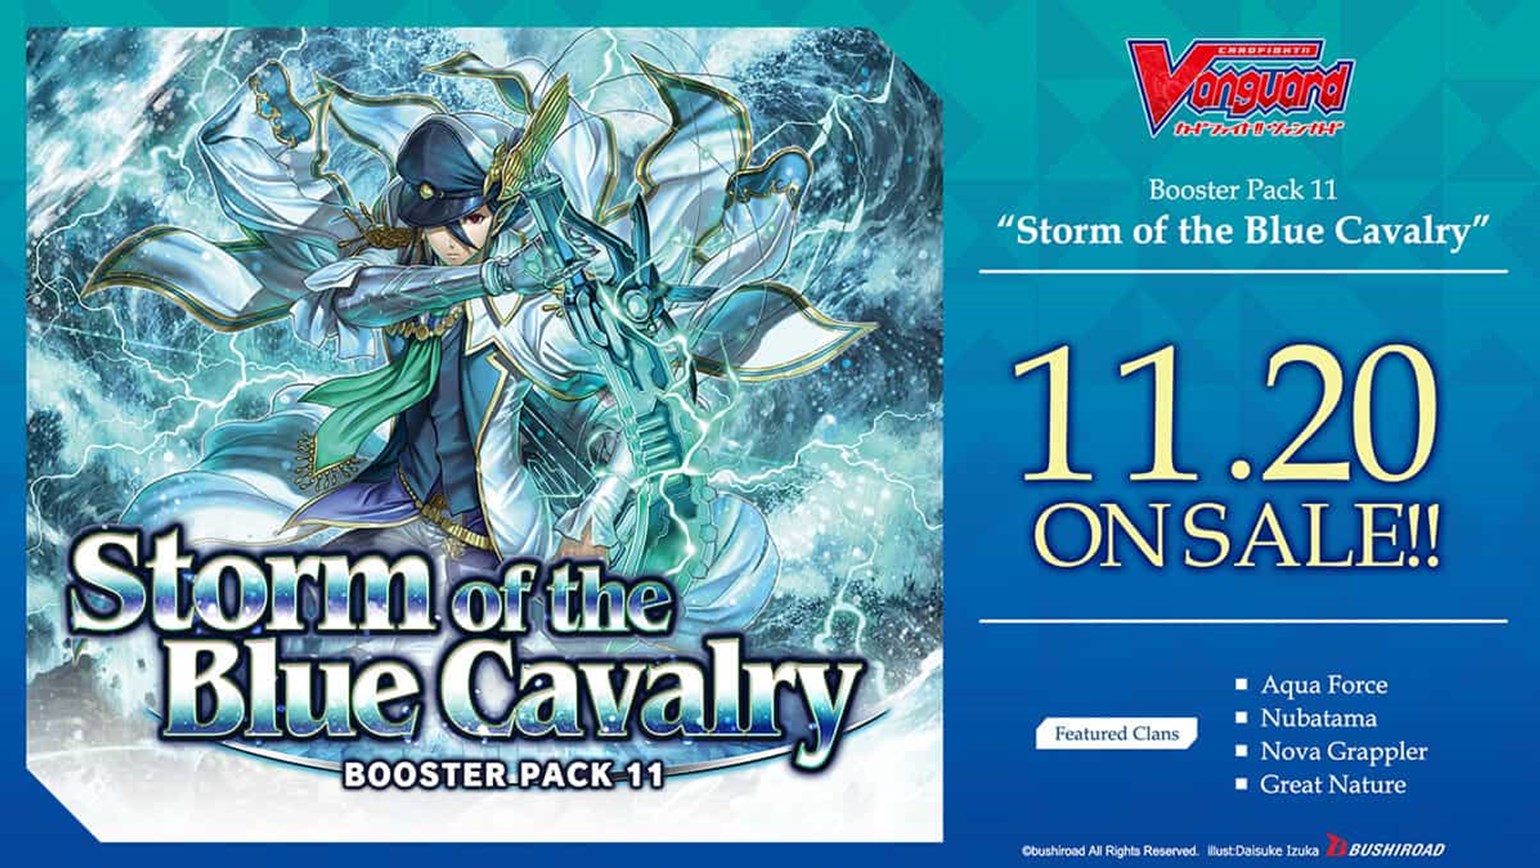 New English Edition Cardfight!! Vanguard Booster Pack Vol. 11: Storm of the Blue Cavalry is Coming to Stores on November 20th!